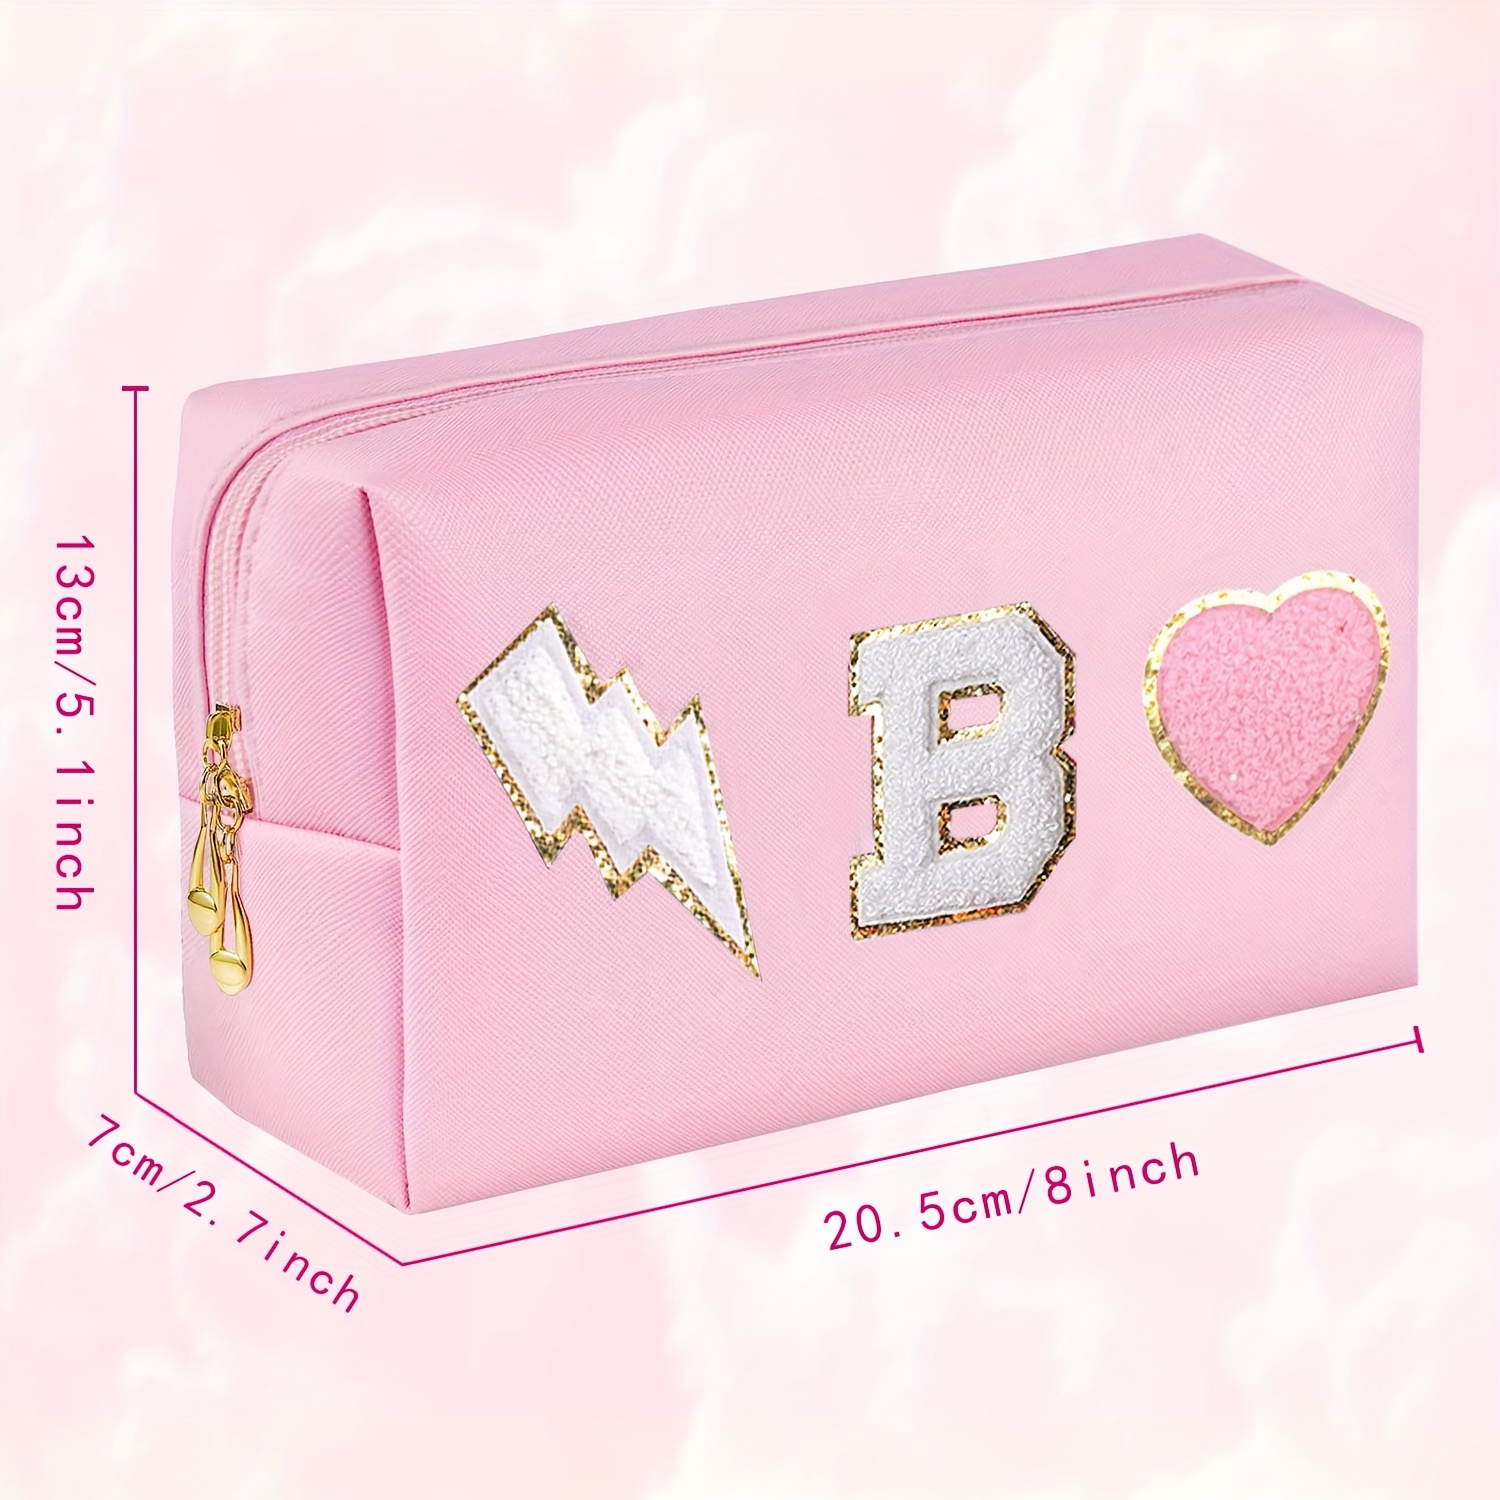 Initial Letter Patch Makeup Bag Preppy Cosmetic Stuff Make Up